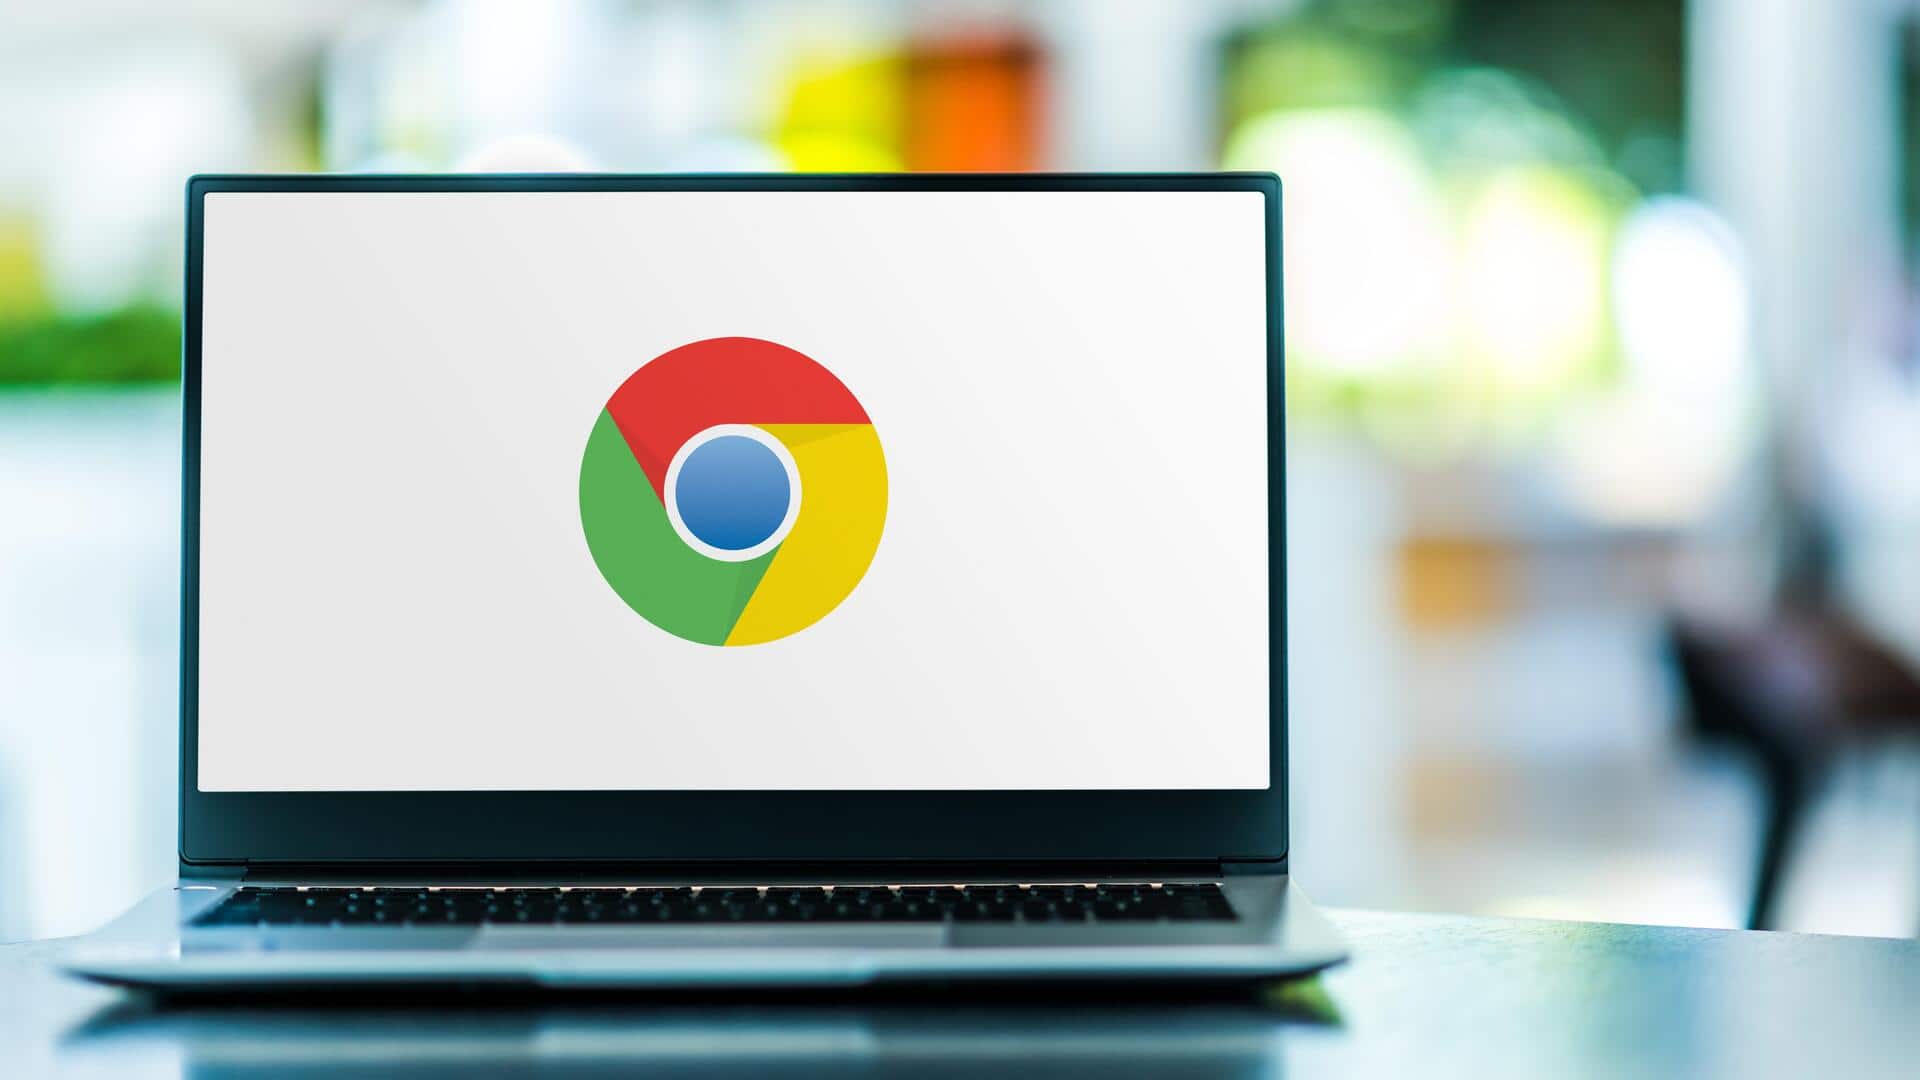 Google rolls out ChromeOS 120 update with usability tweaks